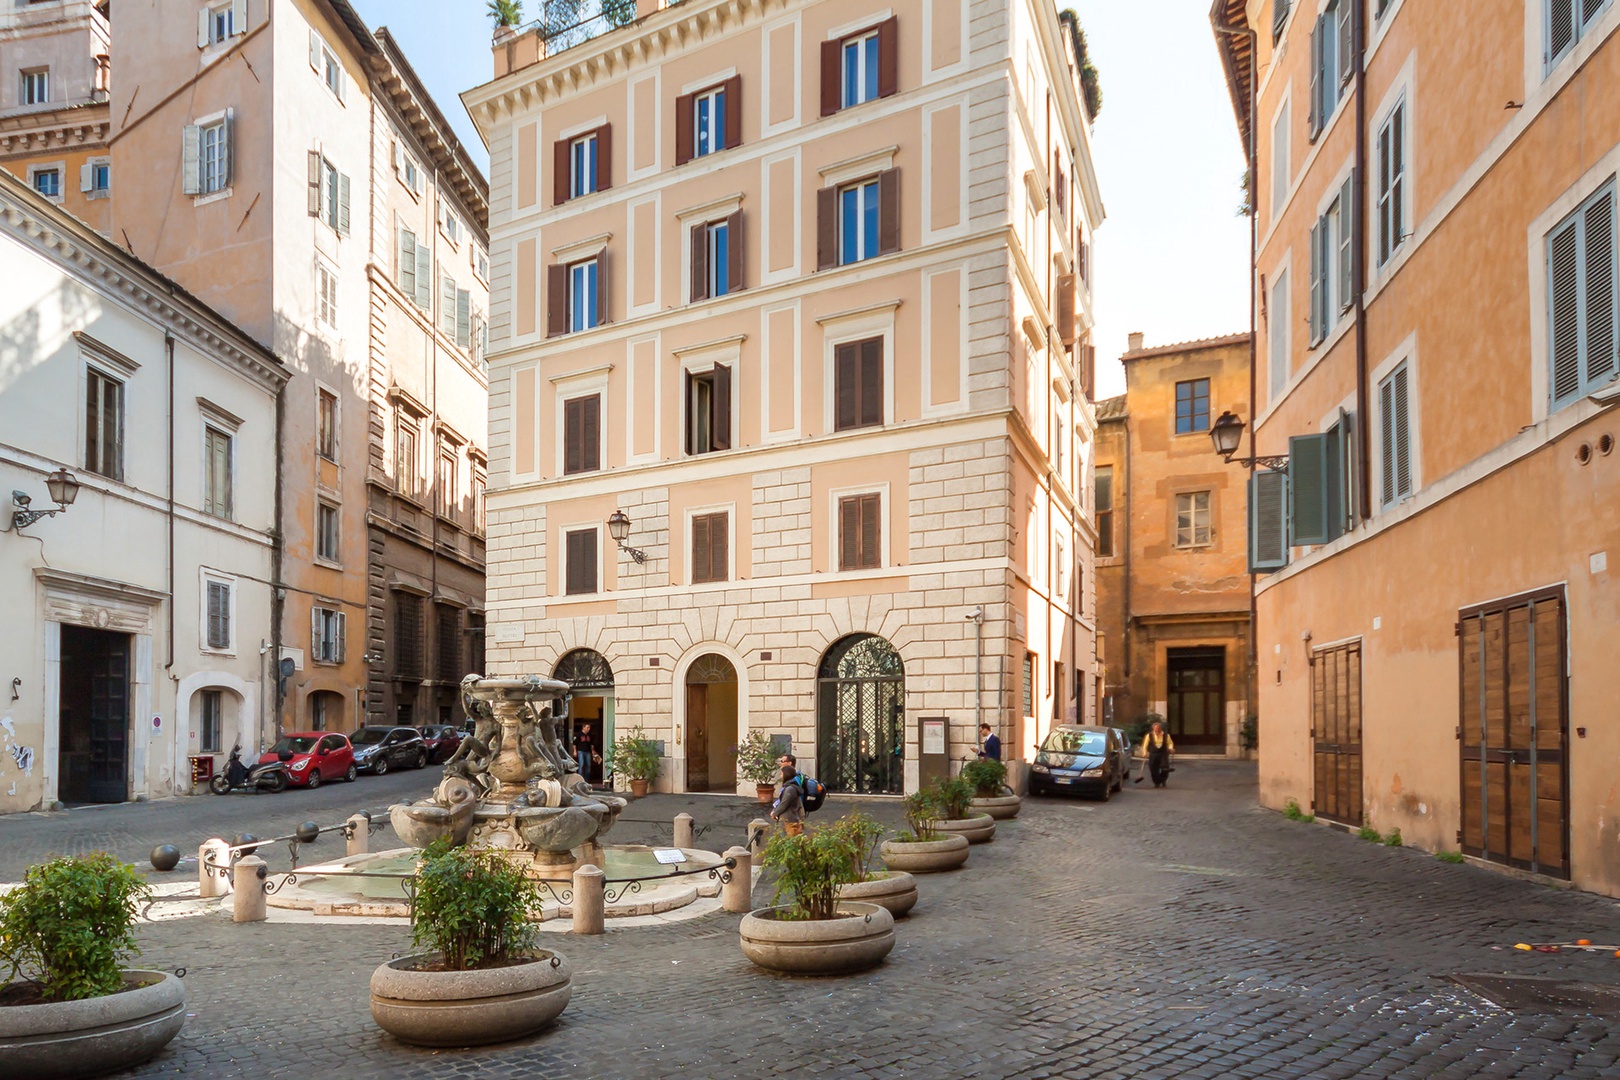 The charming piazza in front of the palazzo with the famous Turtle Fountain.